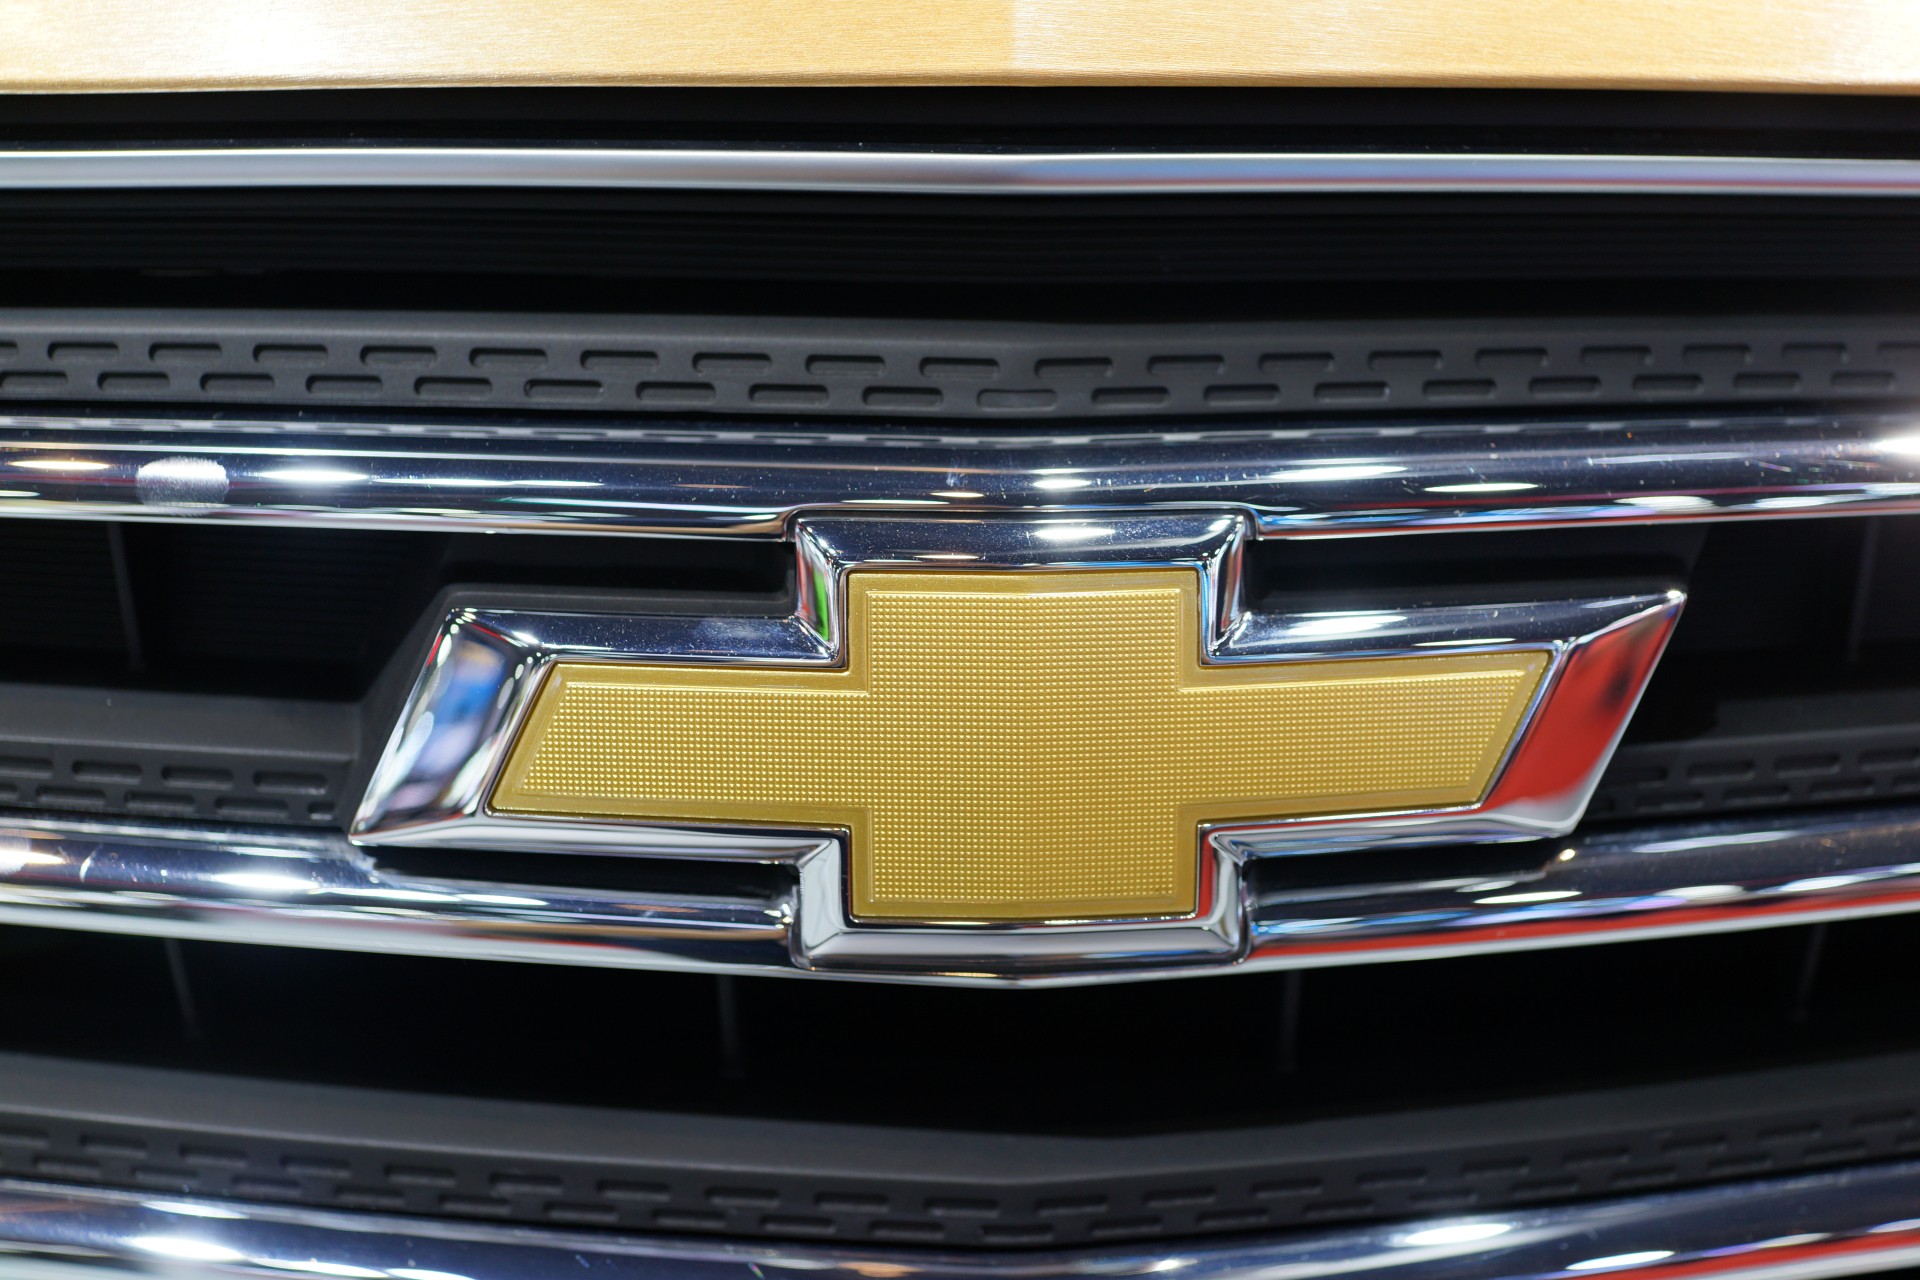 The emblem on the front grille of Chevrolet car at a motor show